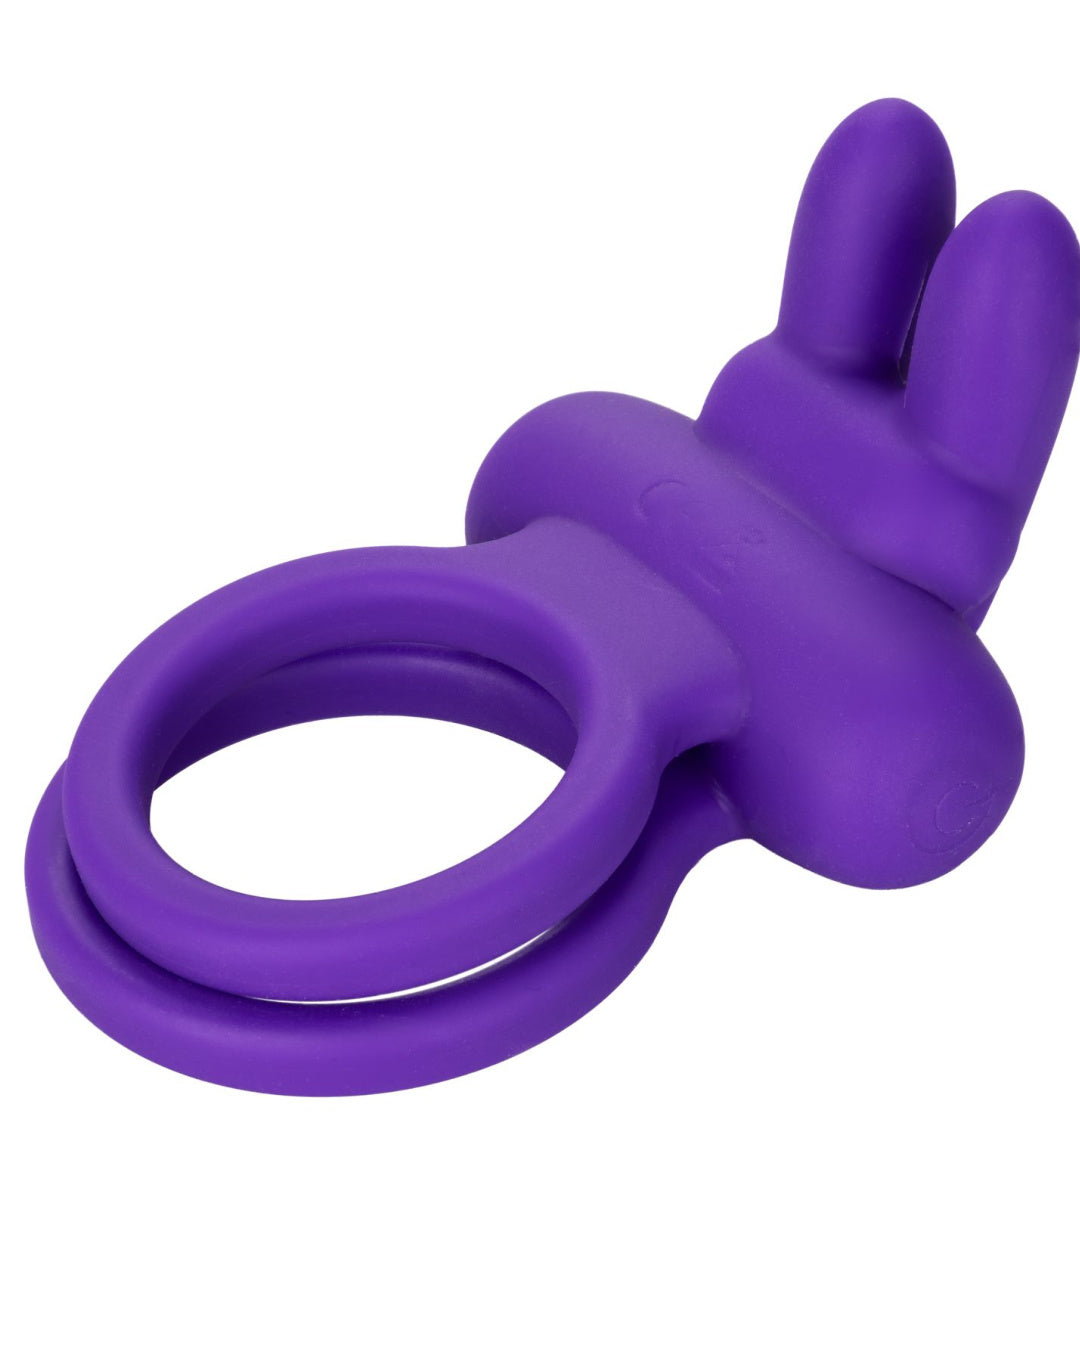 Dual Rockin Rabbit Silicone Vibrating Couples Toy by Calexotics RIng